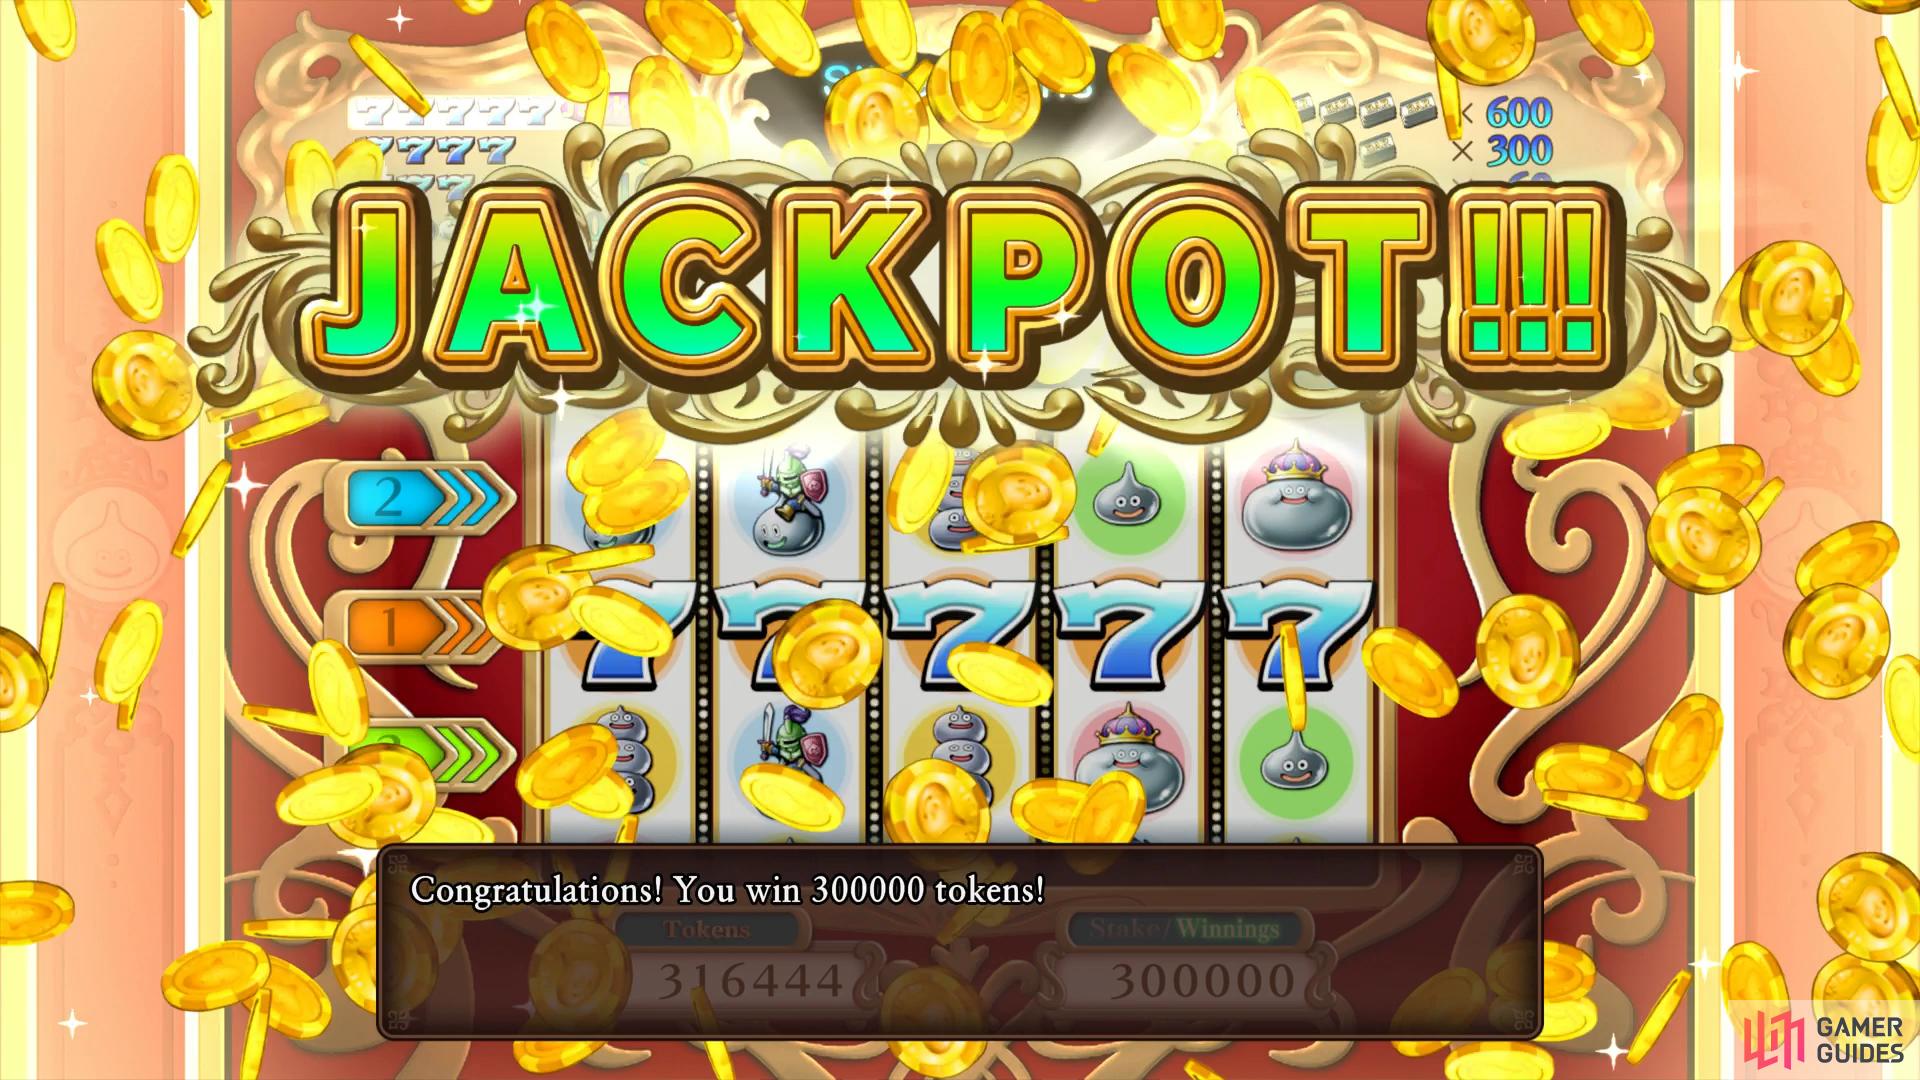 Don't be duped by the sudden surge in luck